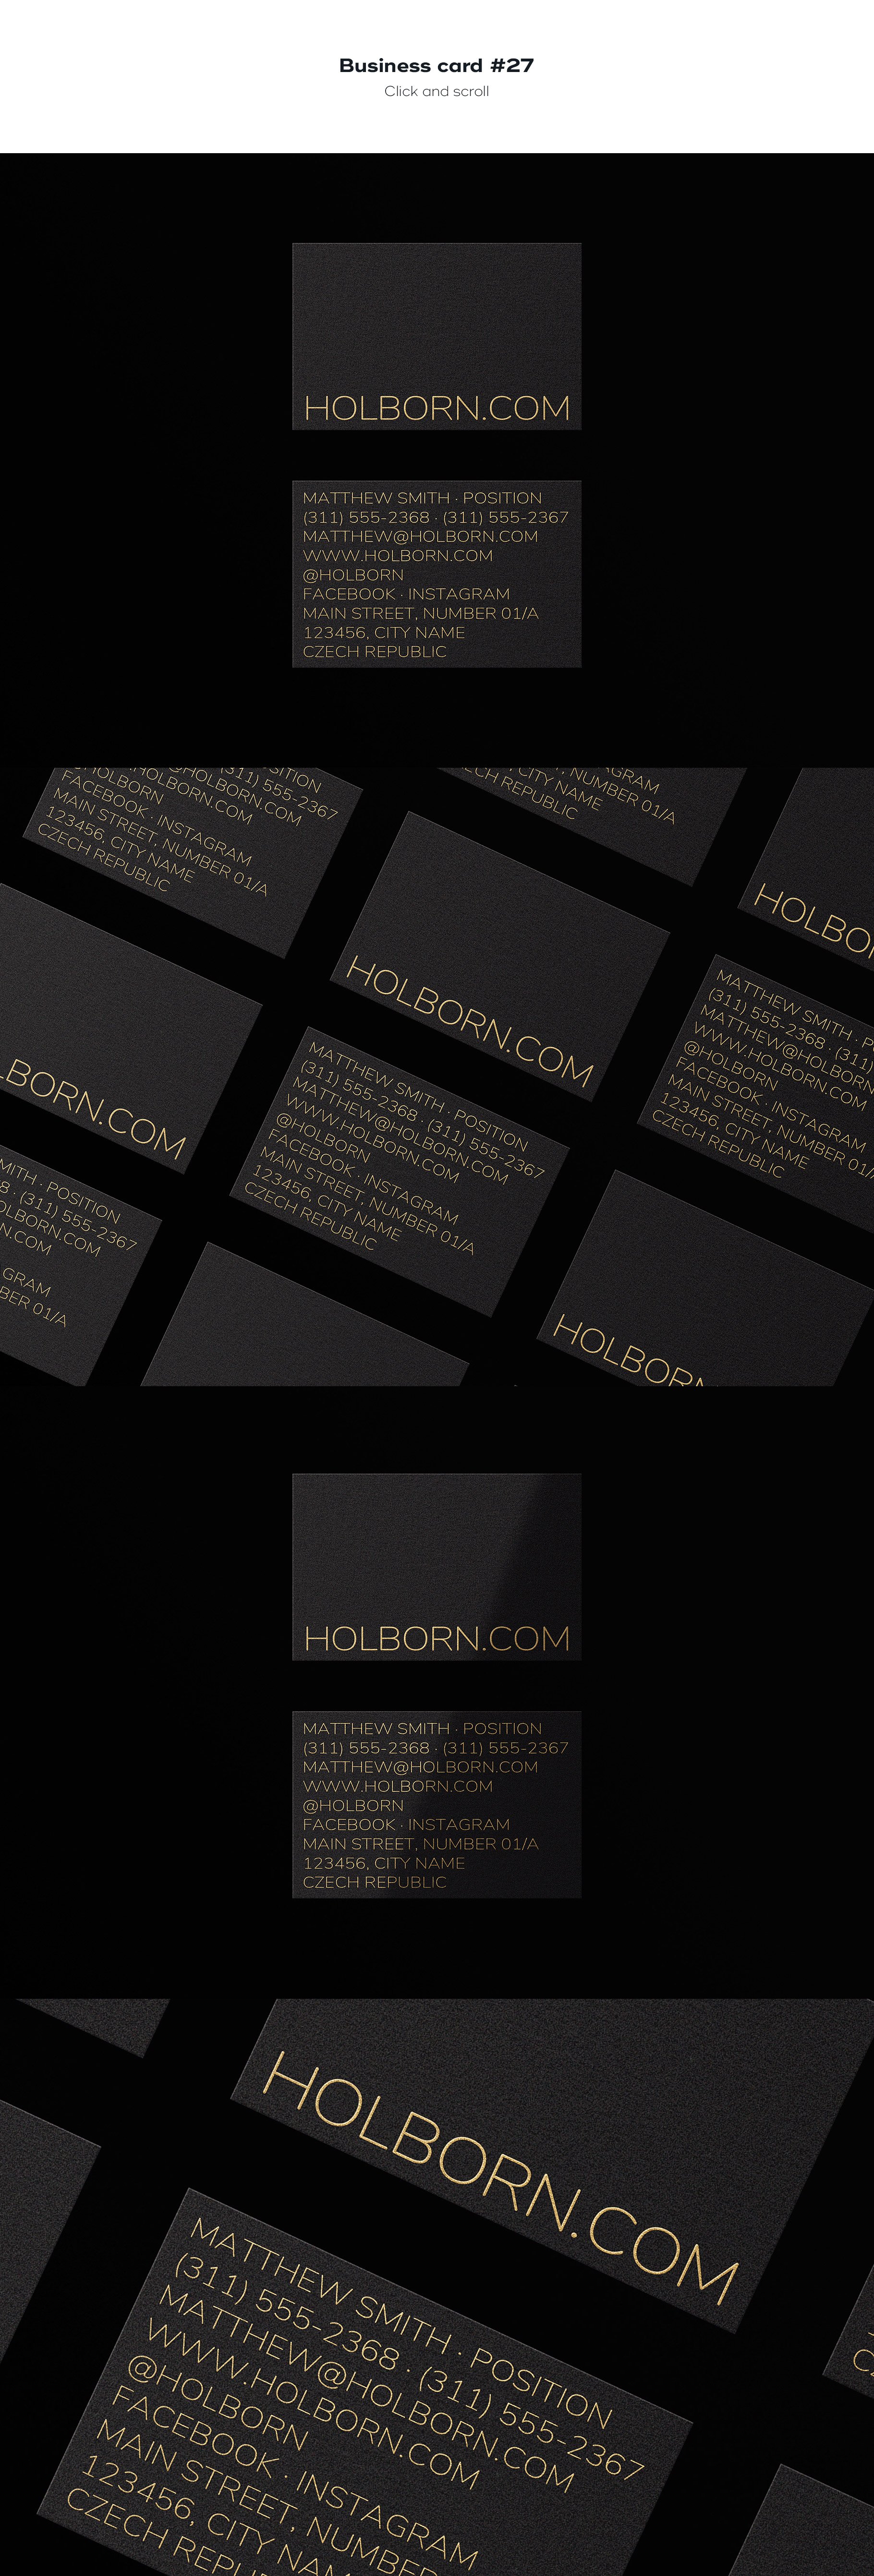 business card 27 702